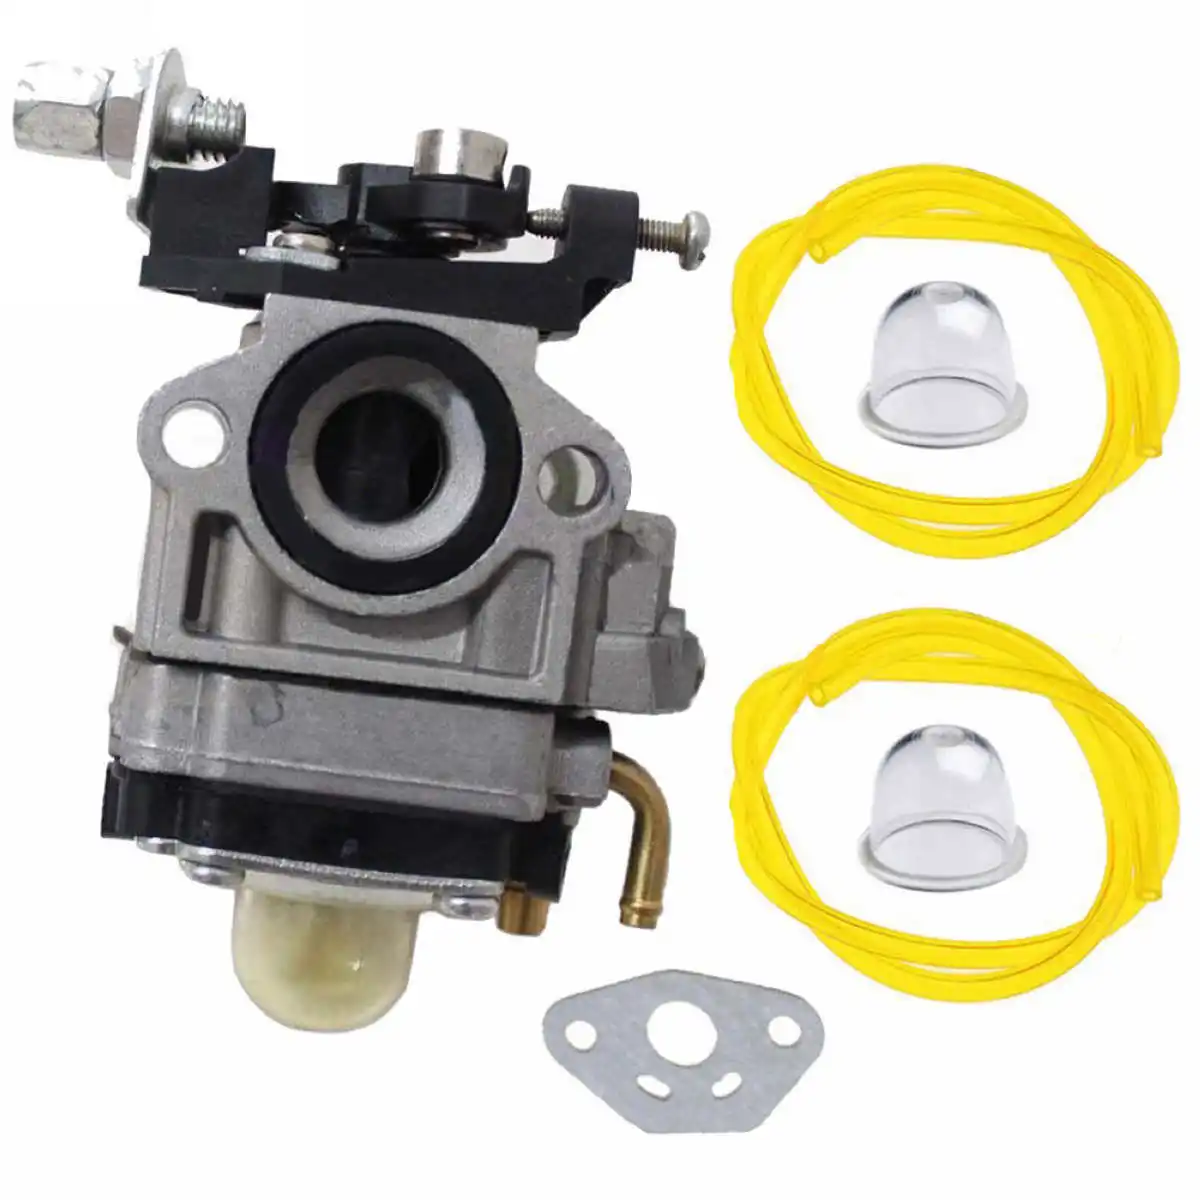 10mm Carburetor Carb for Universal Hedge Trimmer Chainsaw Strimmer Brush Cutter Parts